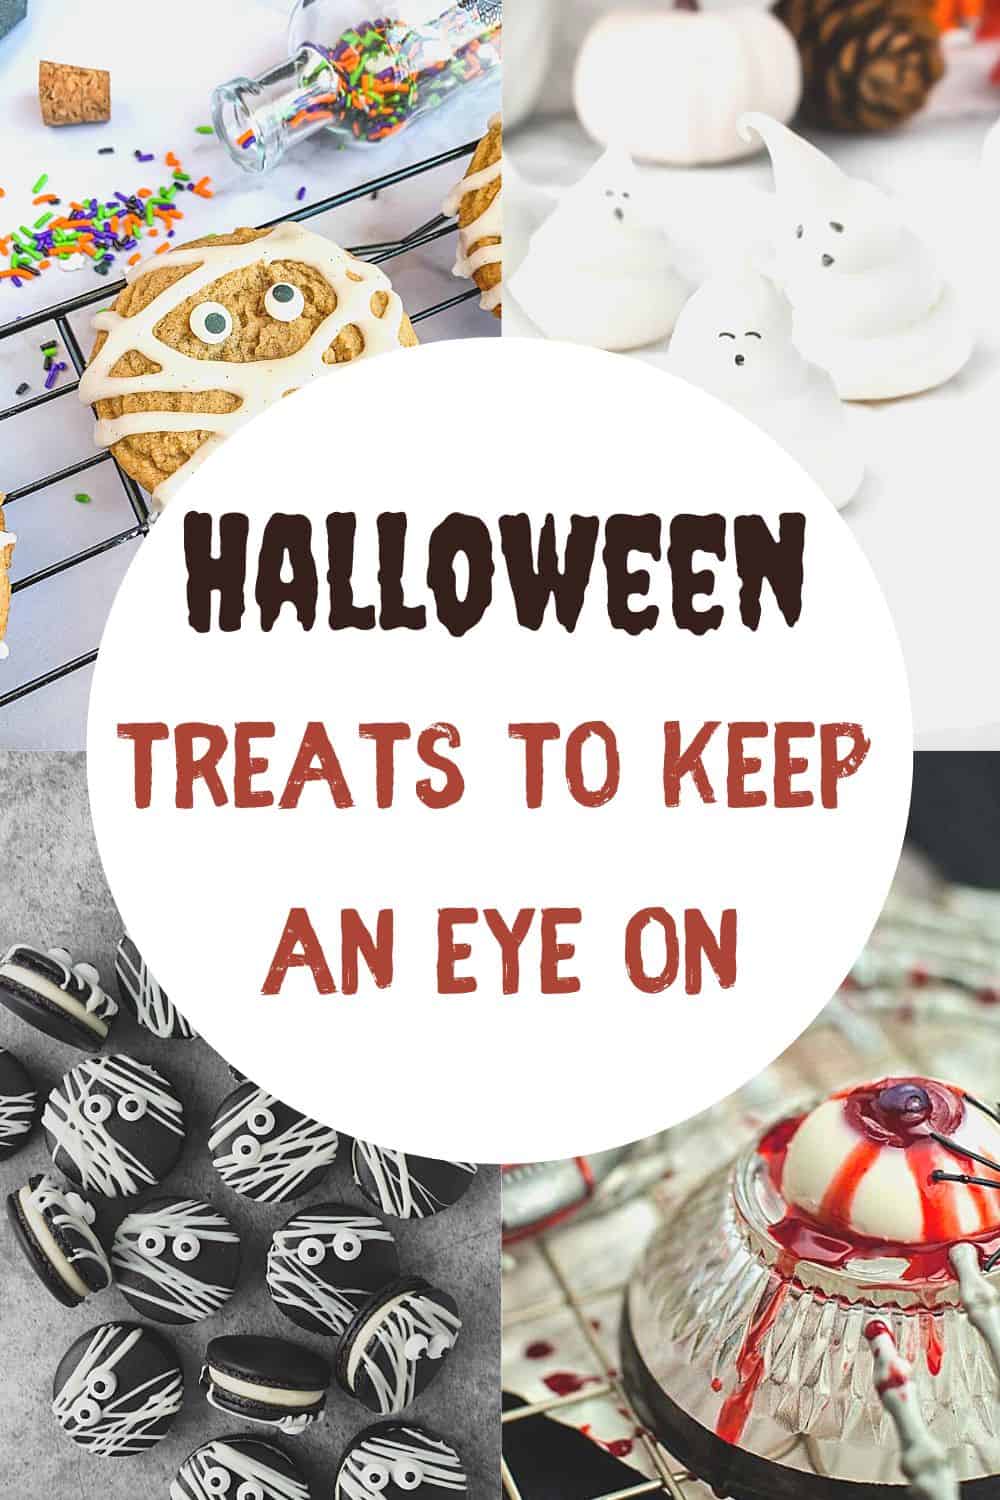 Collage of 4 images - Halloween-themed baked goods with edible eyes